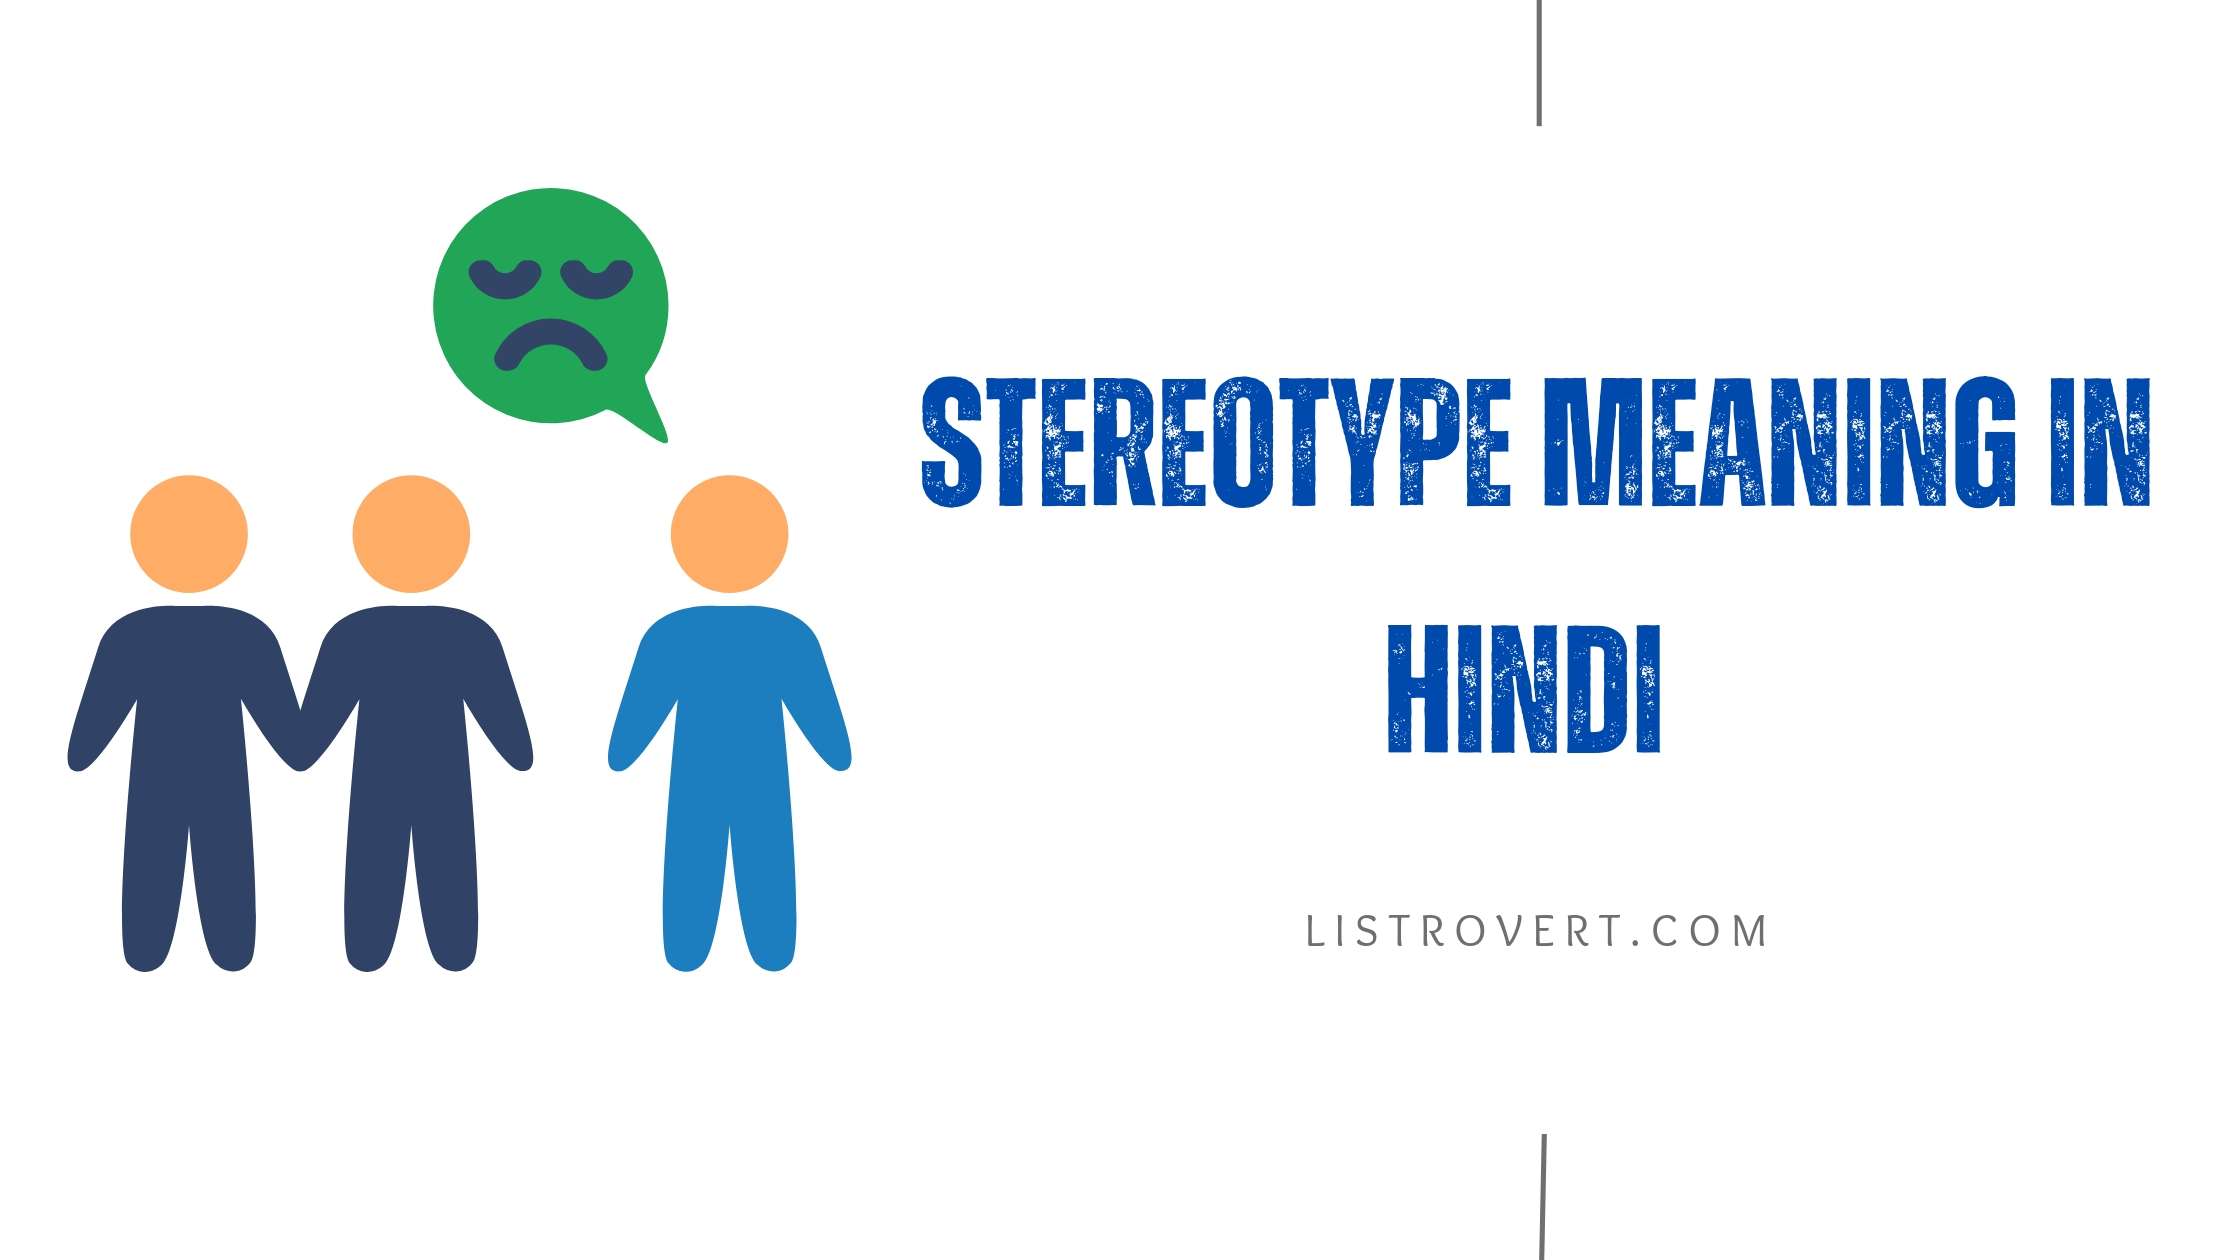 Stereotype meaning in Hindi